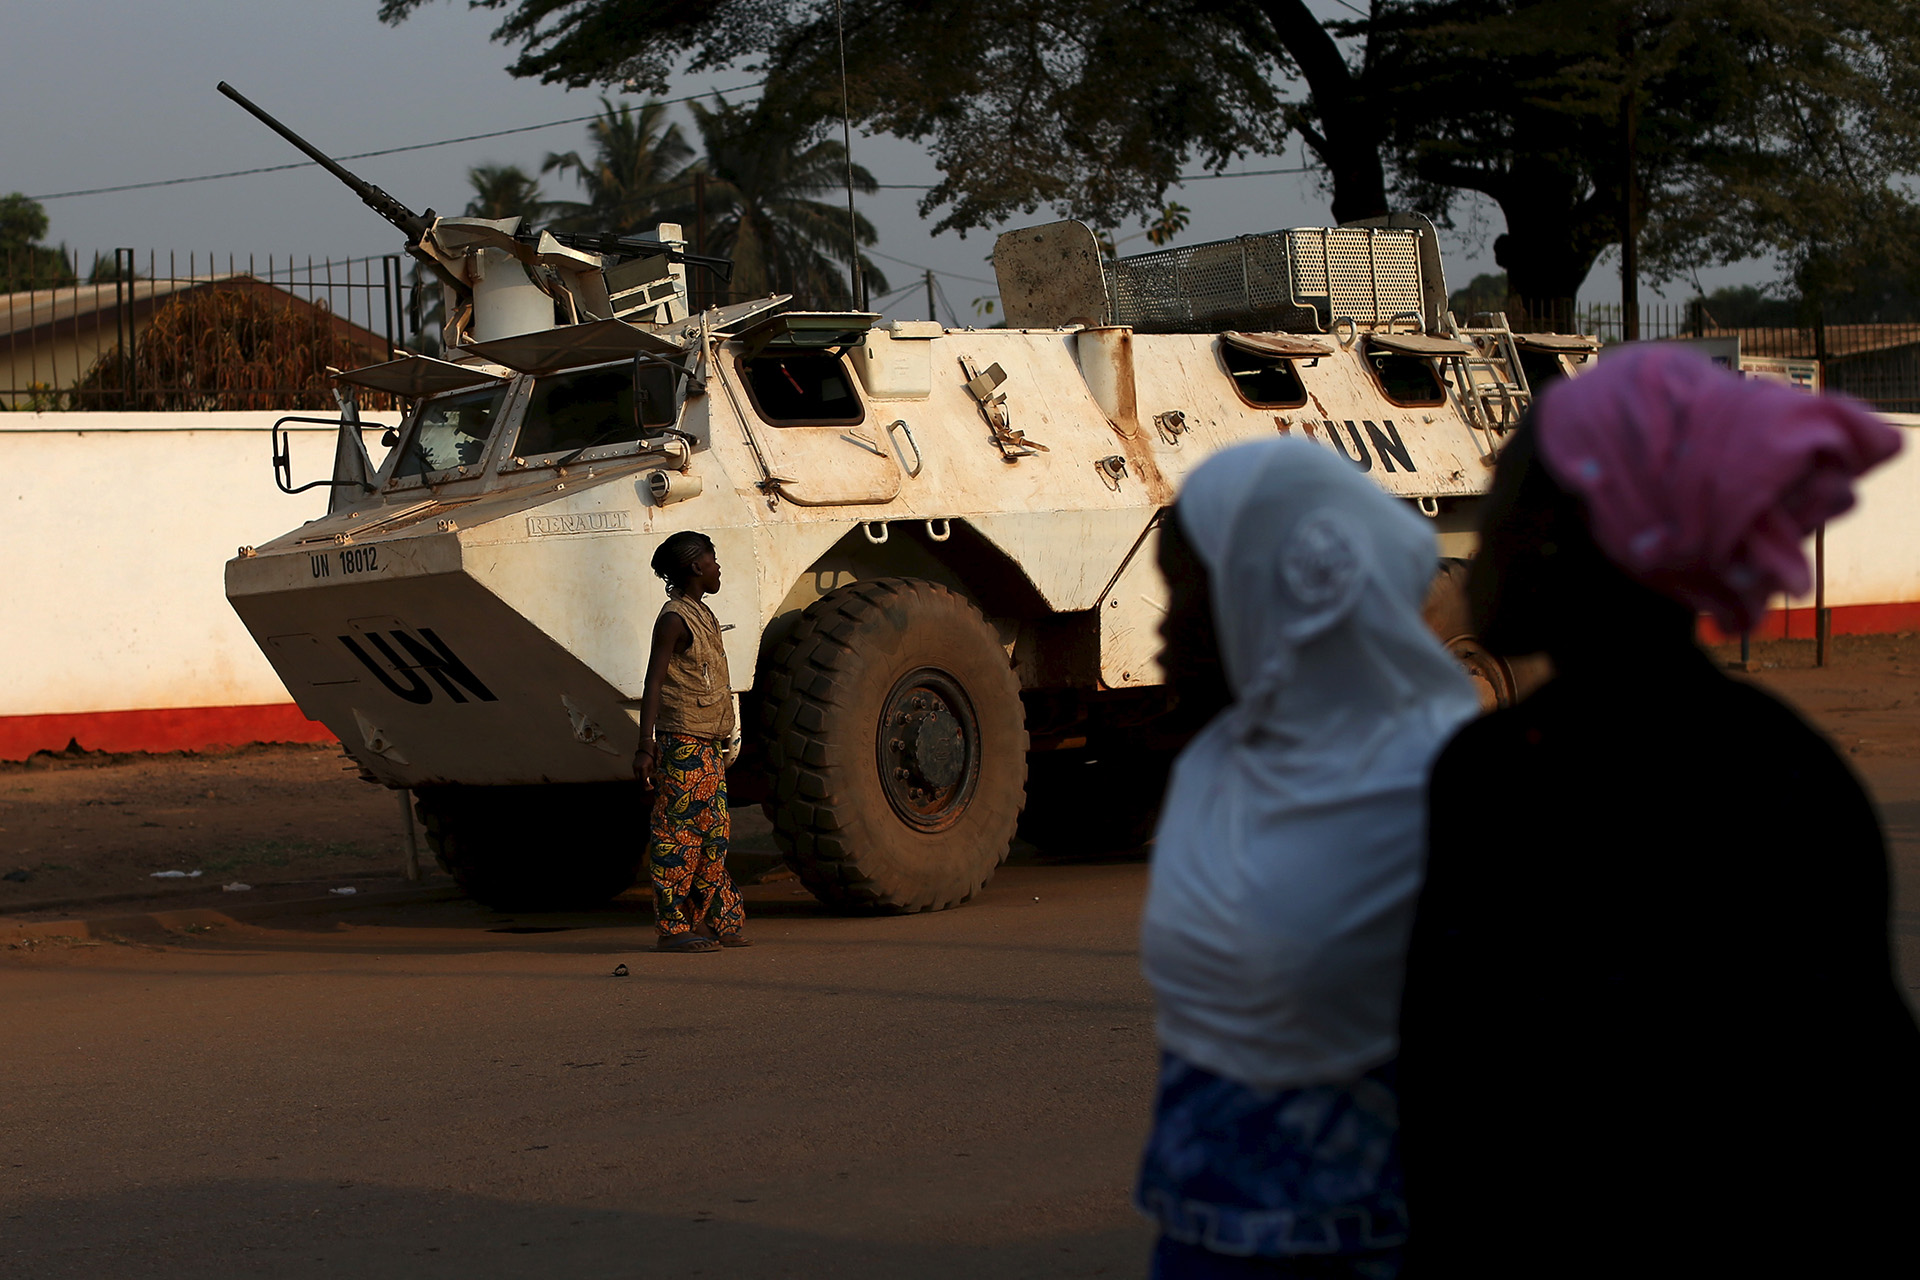 Civilian women out of focus in the foreground walk in front of a UN tank in Central African Republic.